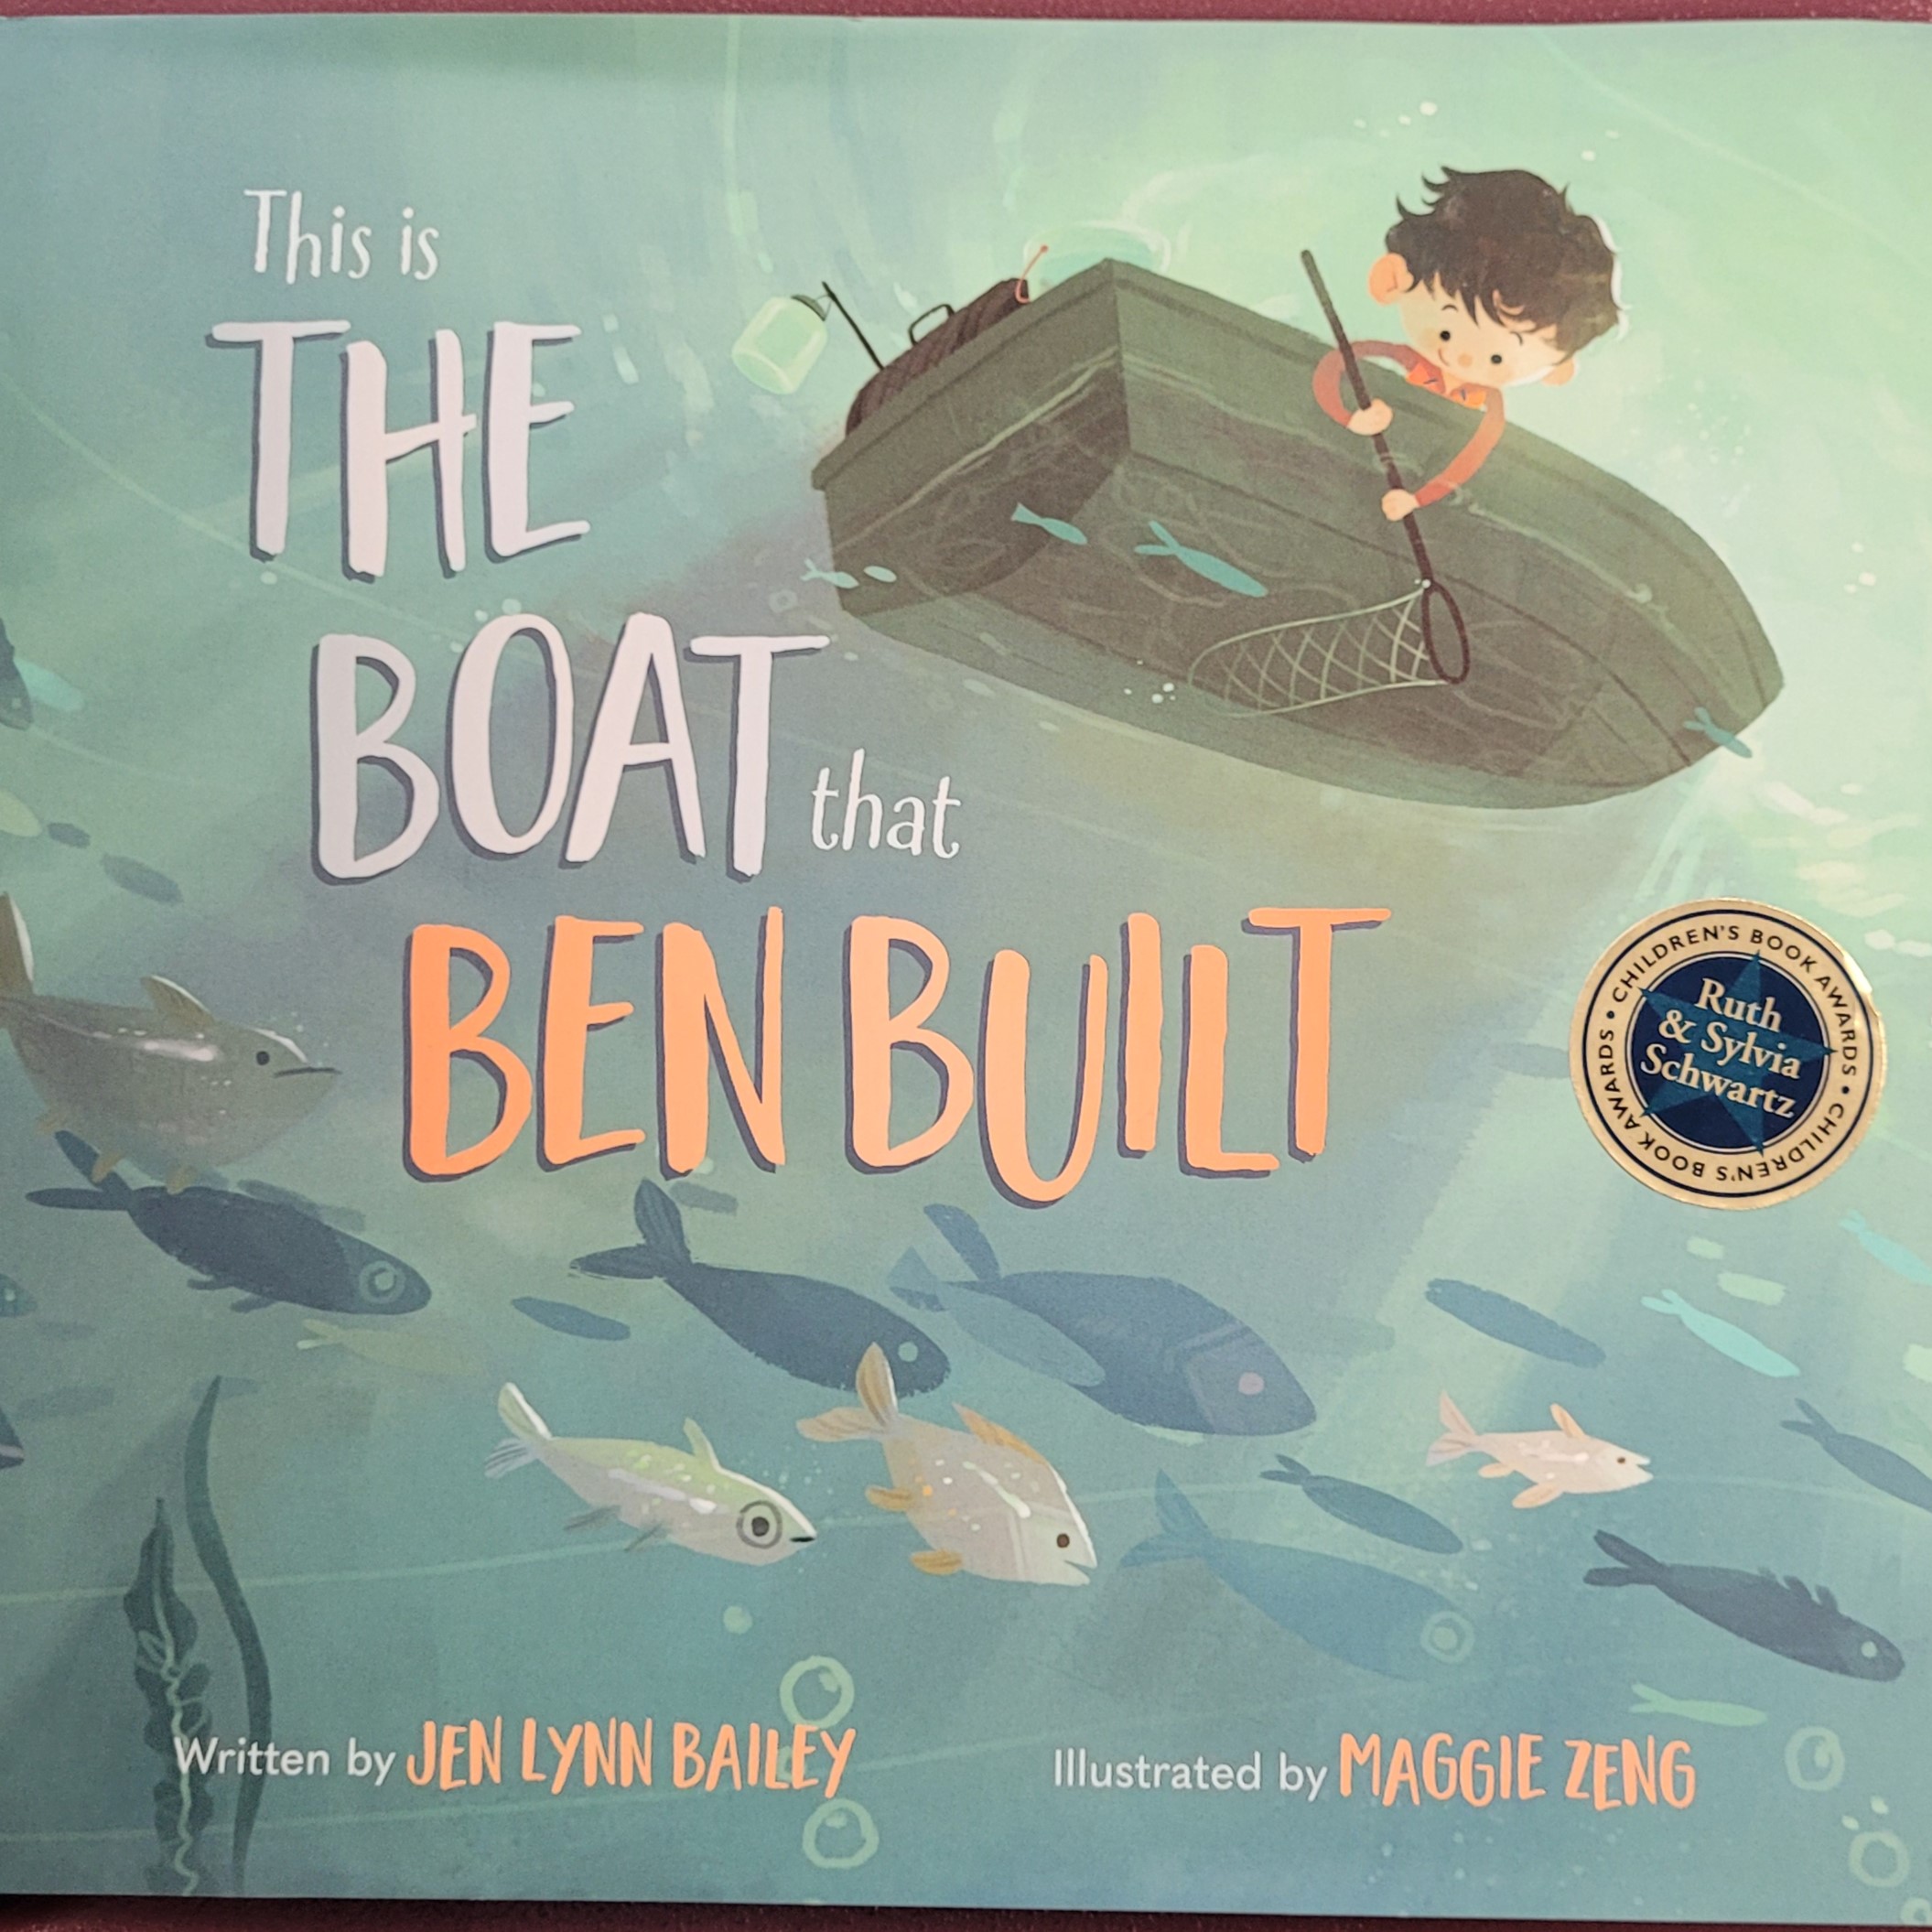 A cover of a picture book, showing a boy in a boat with a school of fish underneath him. The cover has a sticker to indicate that it won the Ruth & Sylvia Schwartz Children's Book Award.